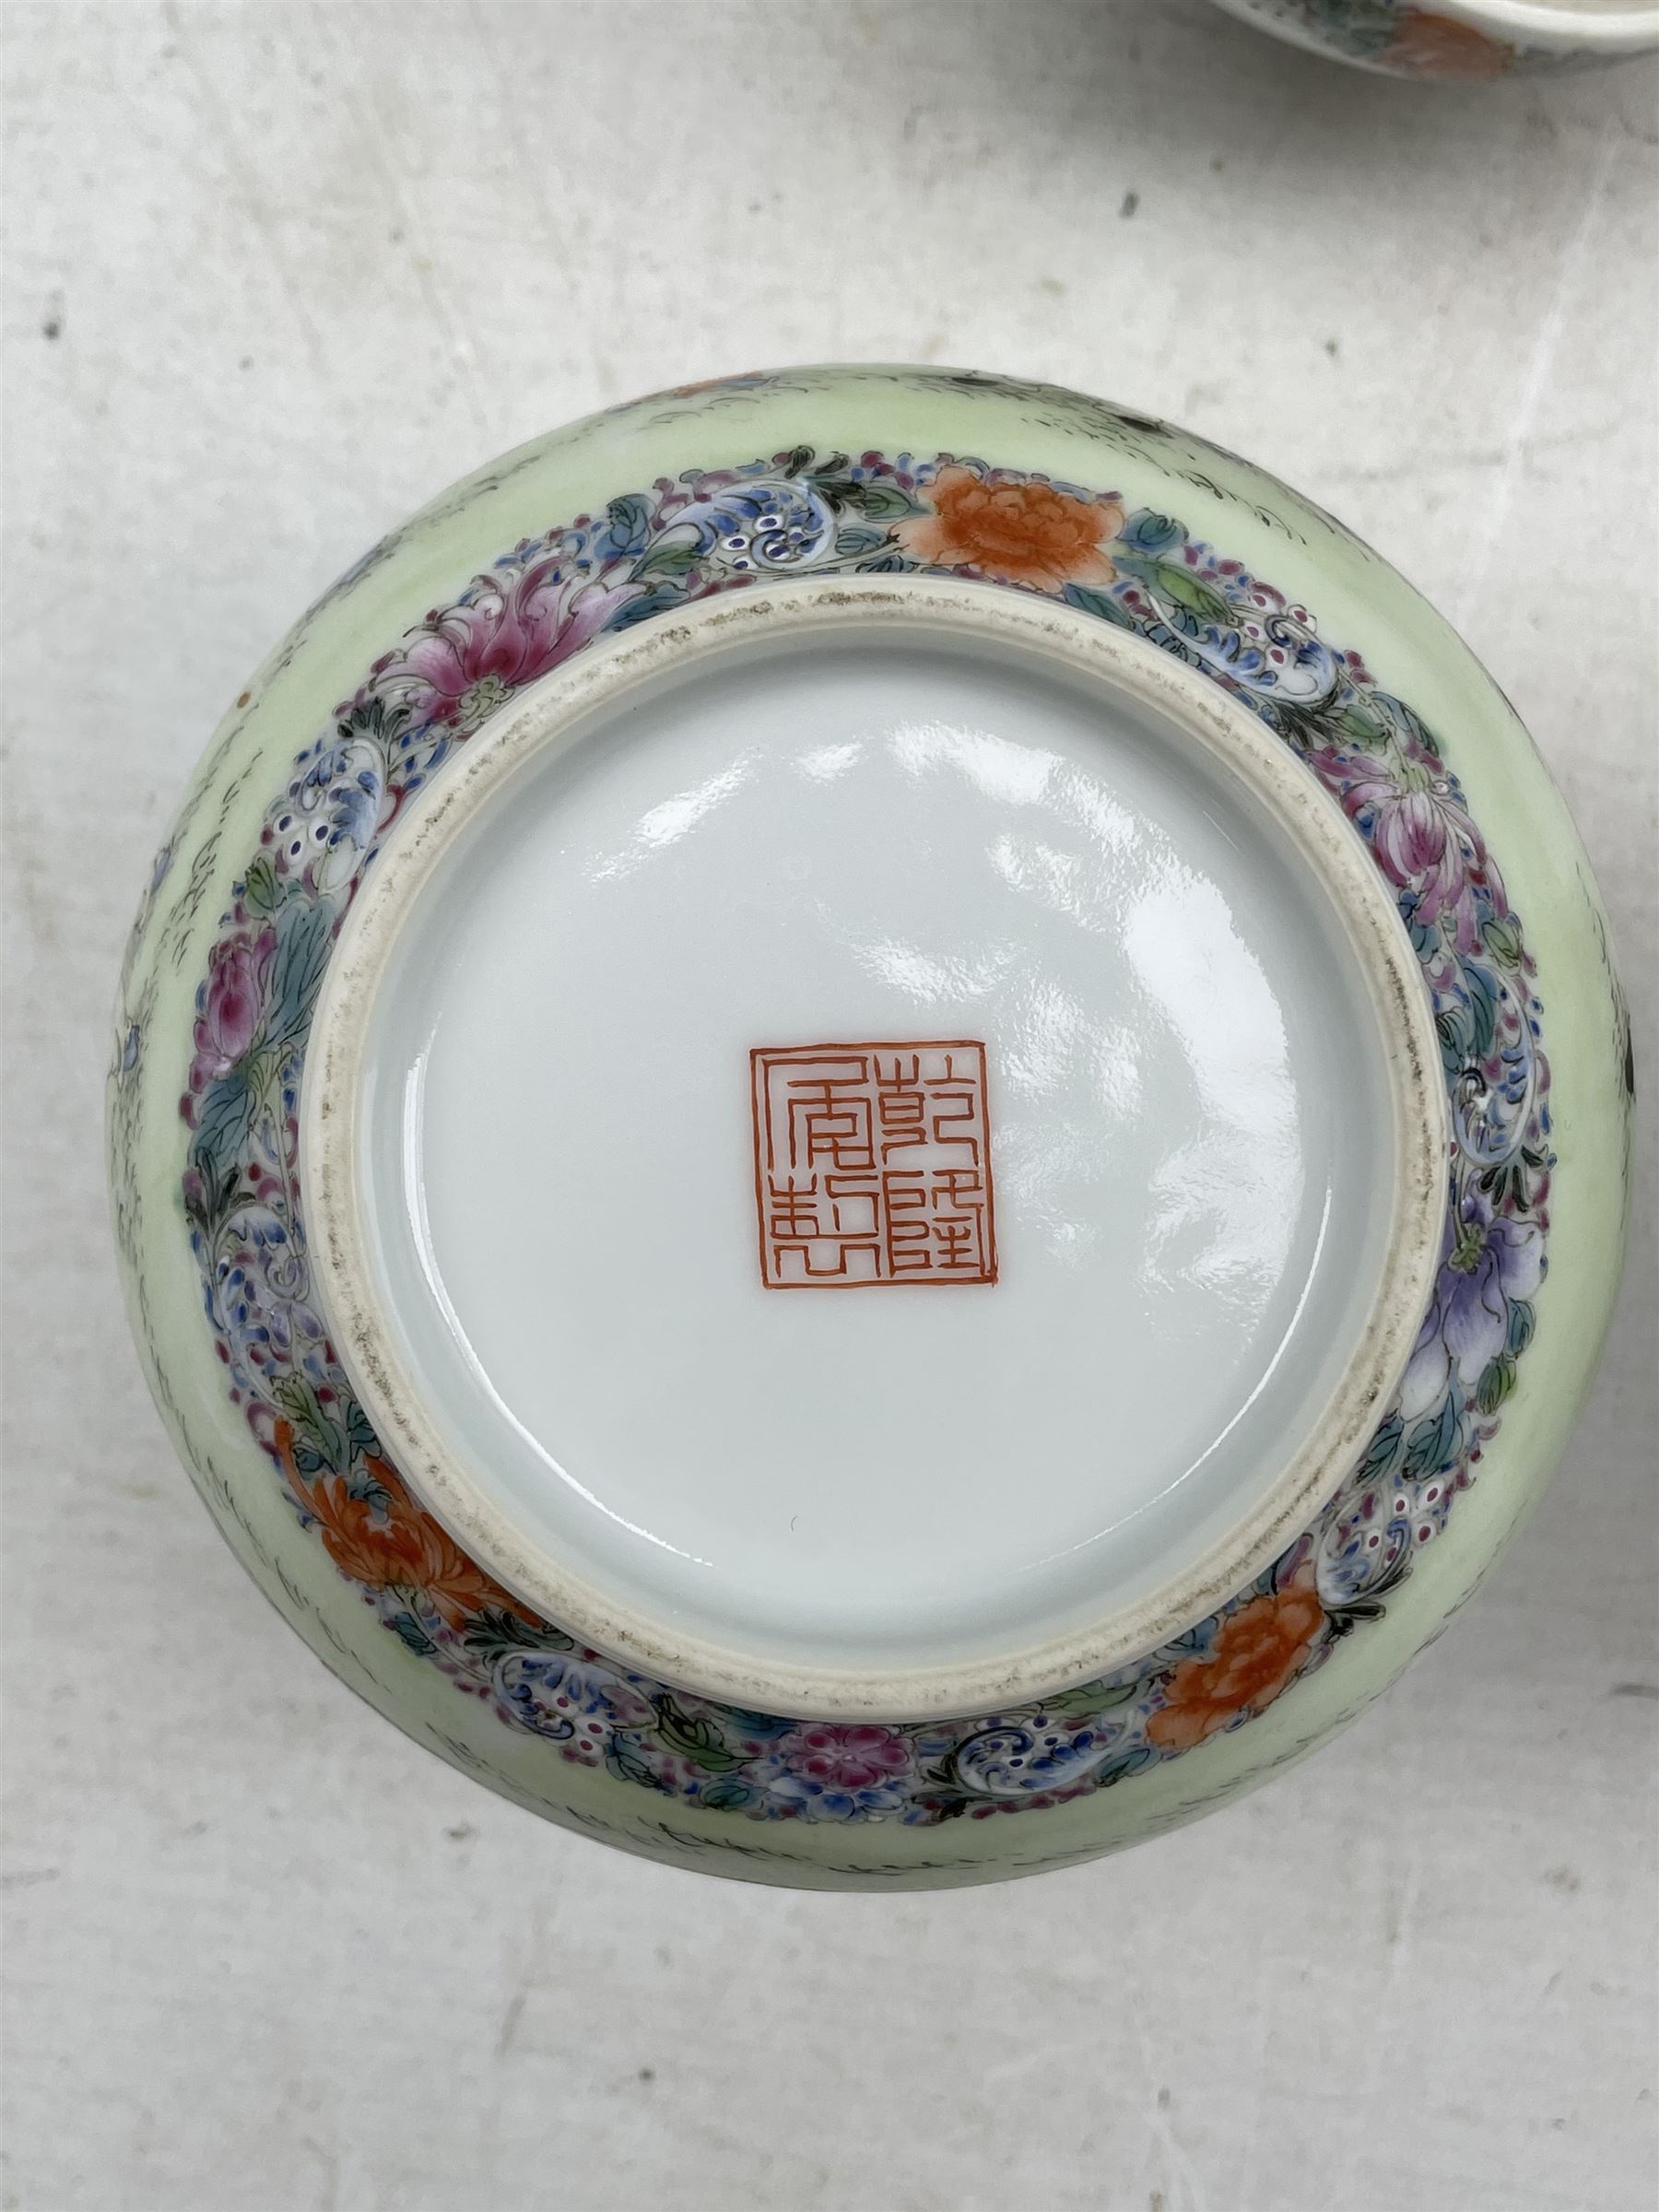 Pair of Chinese Republic Period porcelain bowls and covers - Image 6 of 8